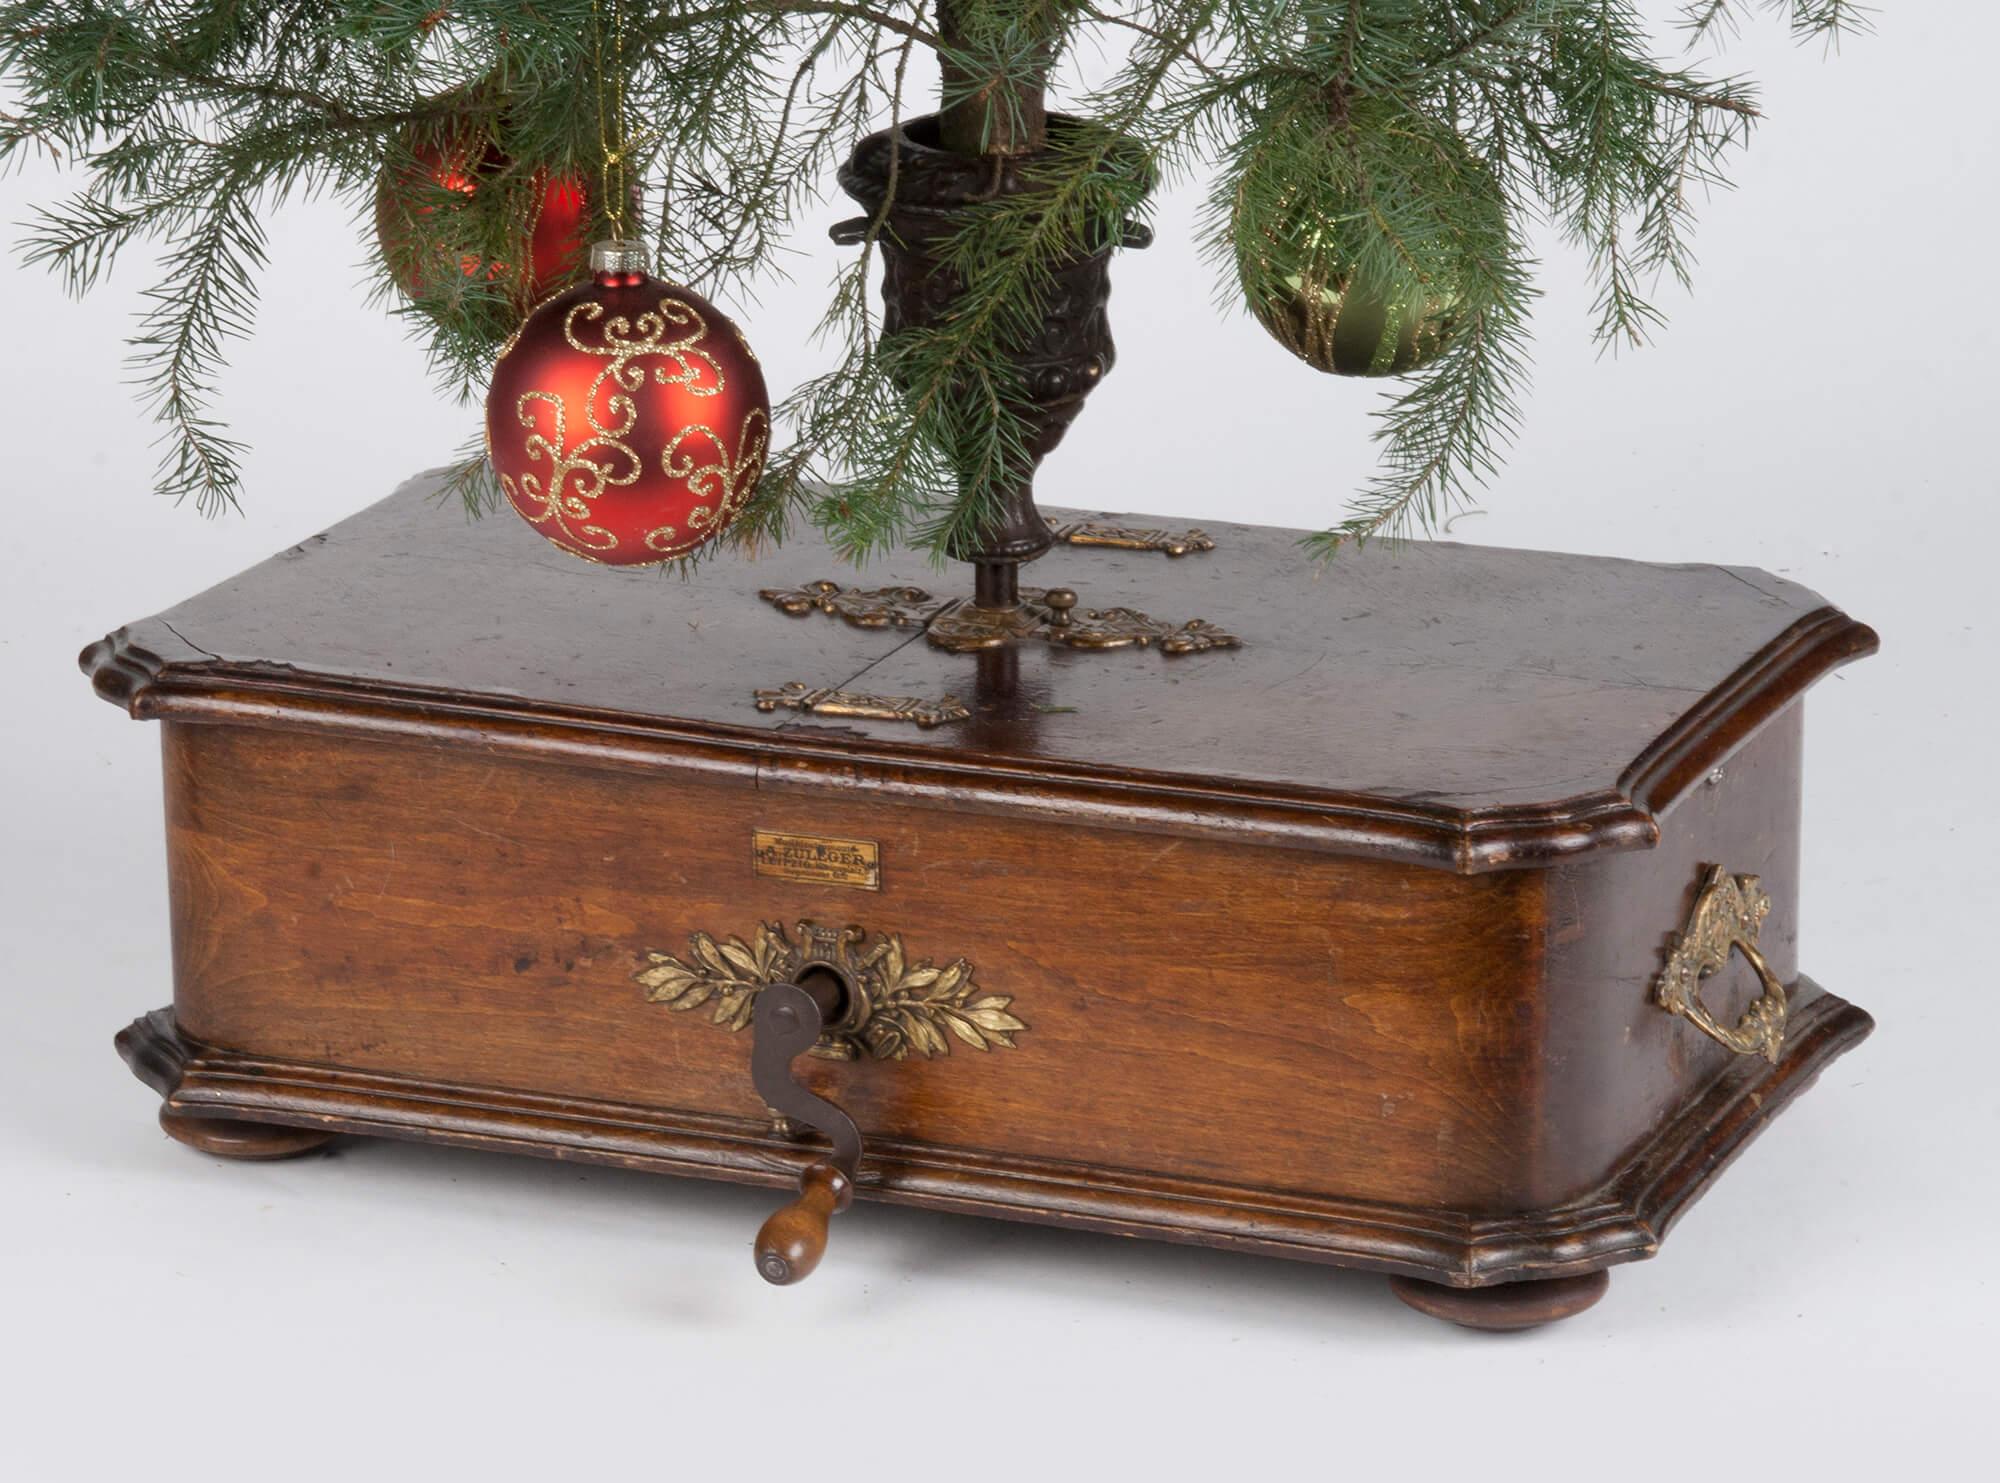 A rare and decorative German eye-catcher for the Christmas holiday. The Stand is meant to hold a tree and rotates while the music is playing. A beech veneered Kalliope box with bronze fittings. Inside the music mechanism, including 4 silver plated